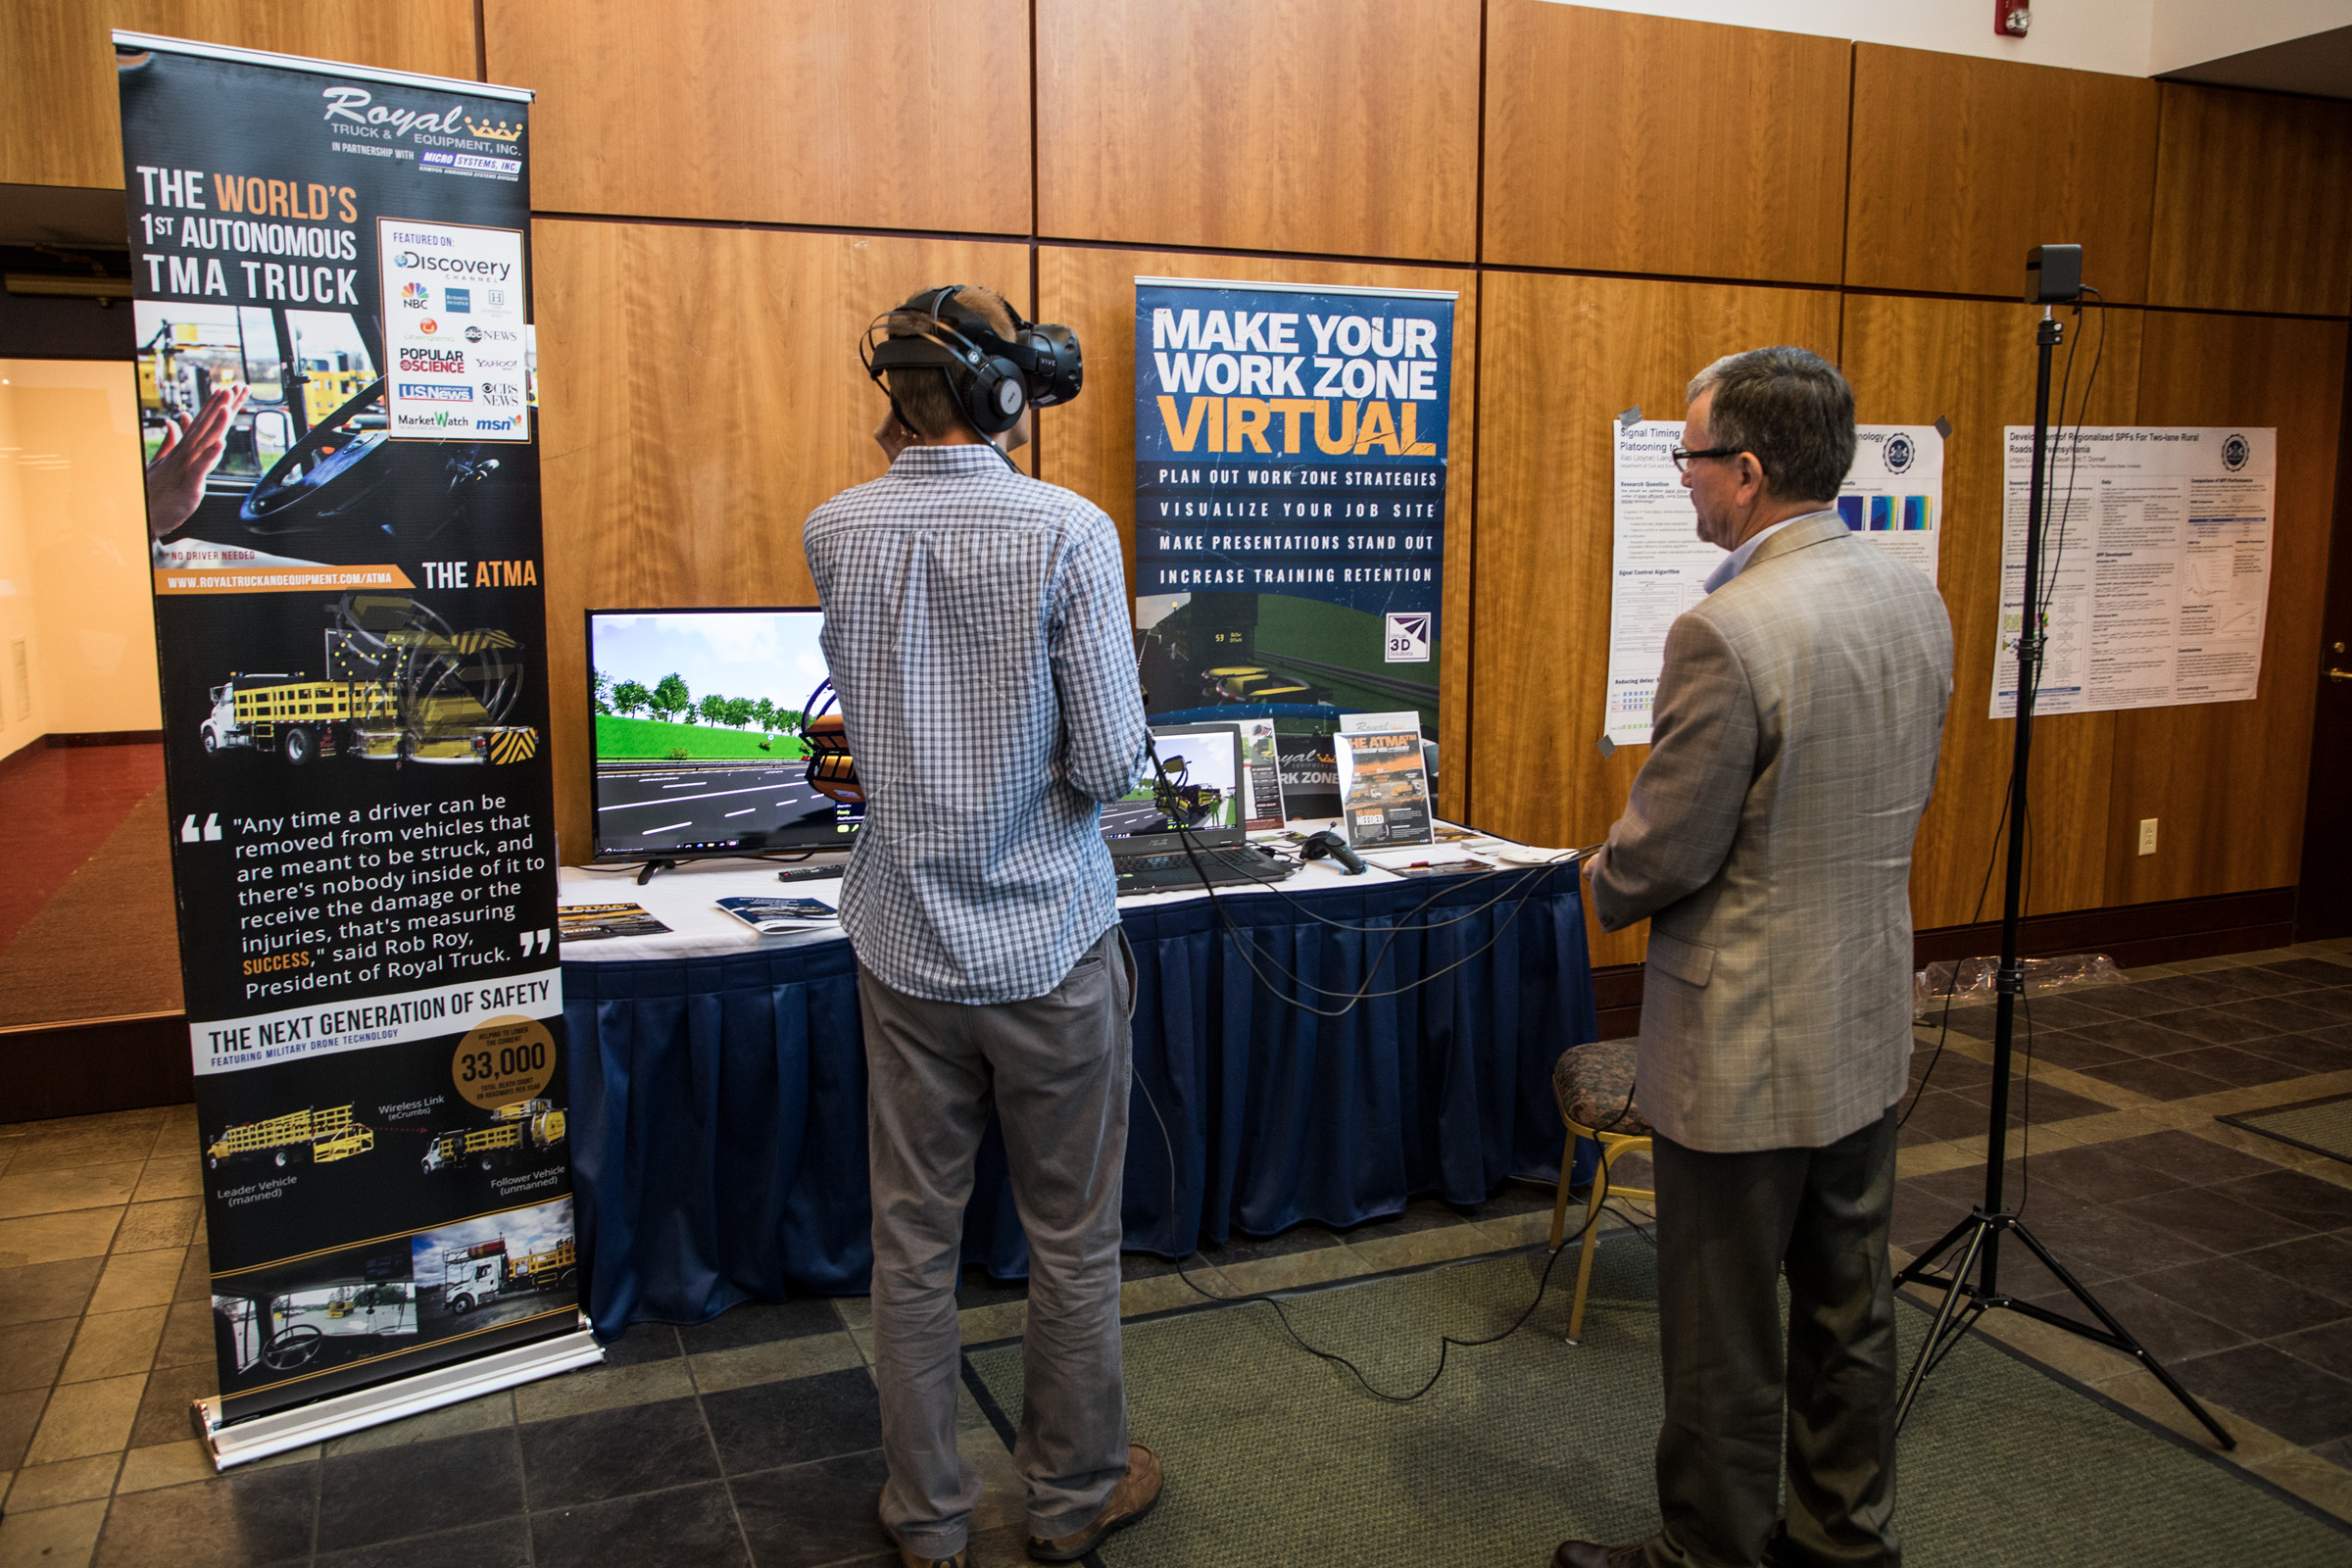 Summit attendee wears virtual reality goggles at an exhibit by Royal Truck & Equipment Inc.